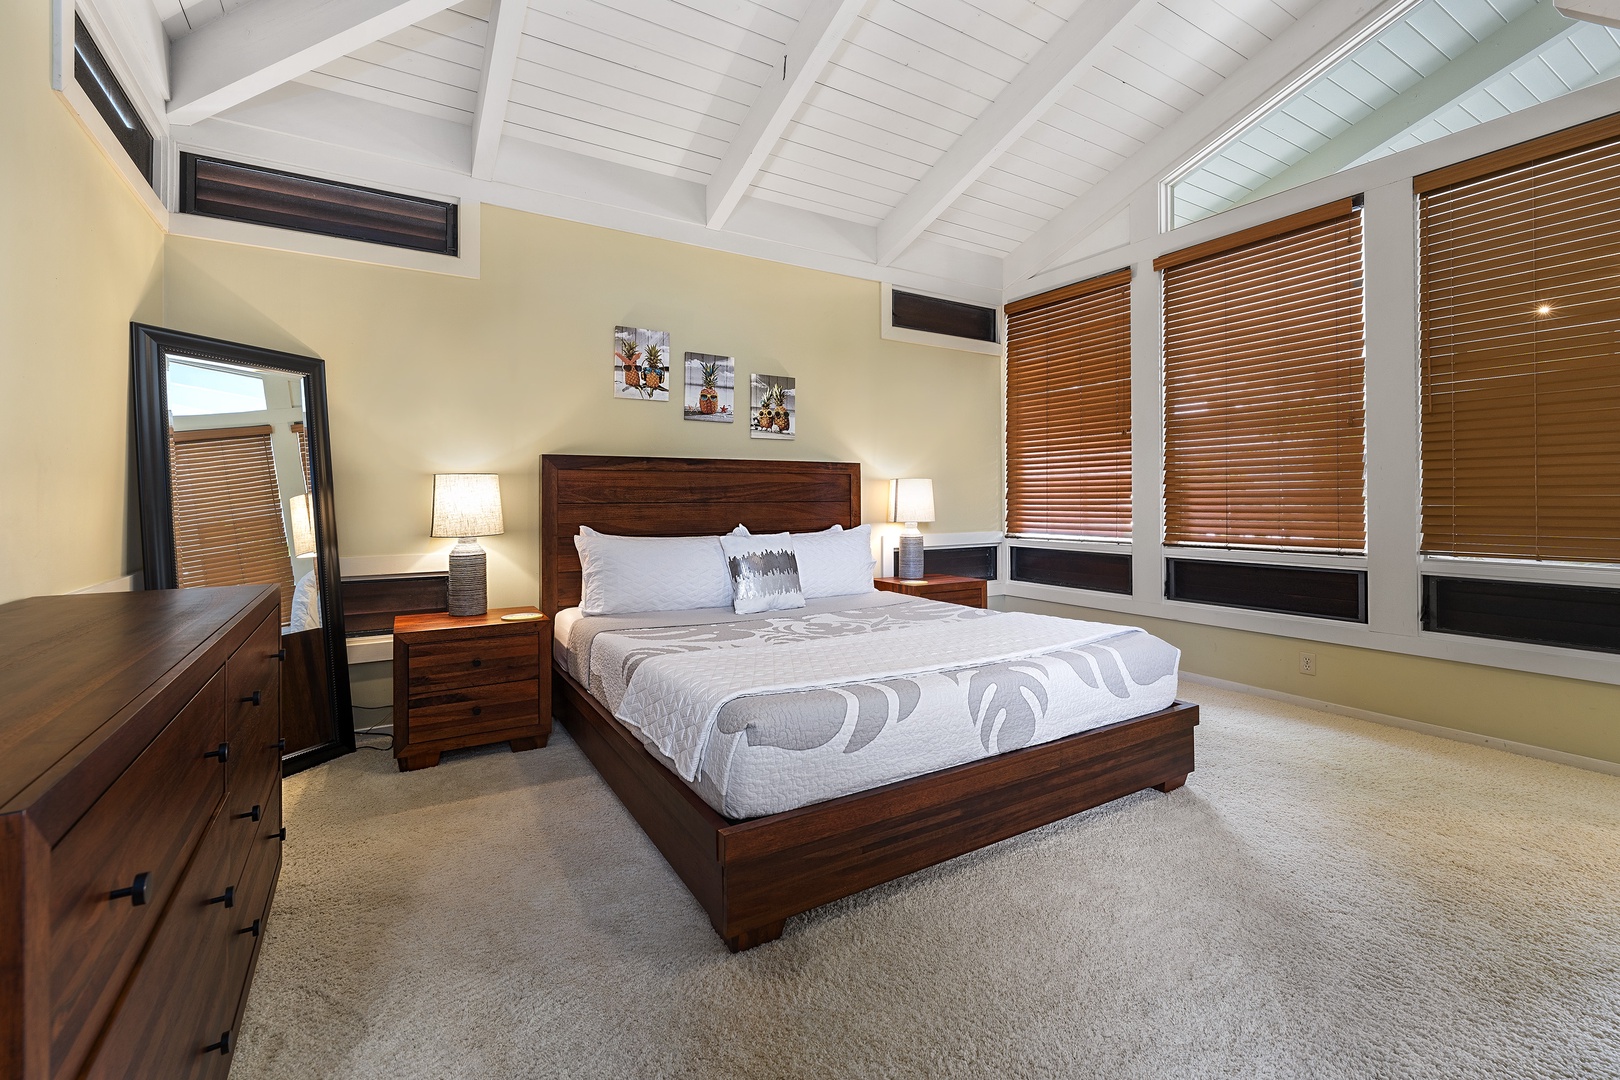 Kailua Kona Vacation Rentals, Pineapple House - Guest bedroom 1 equipped with King bed, A/C, & TV